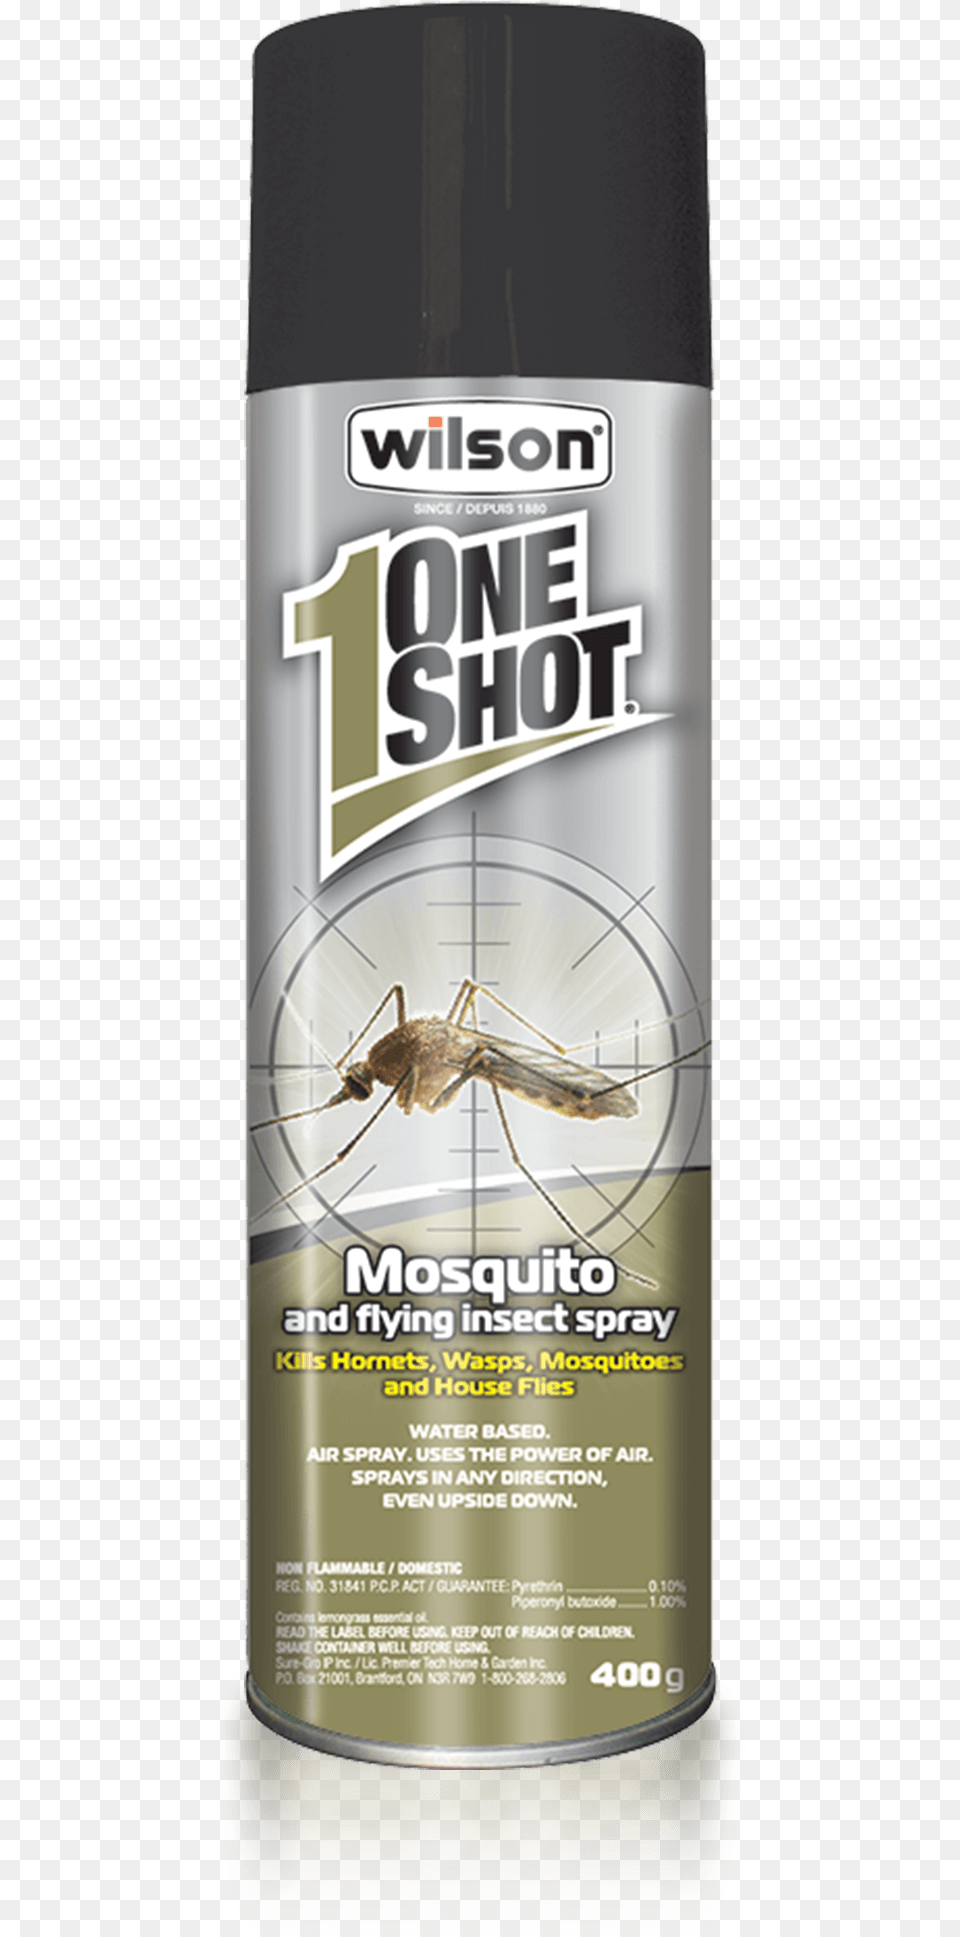 Wilson One Shot Mosquito Flying Insect Killer Arachnicide, Animal, Invertebrate, Spider, Alcohol Free Png